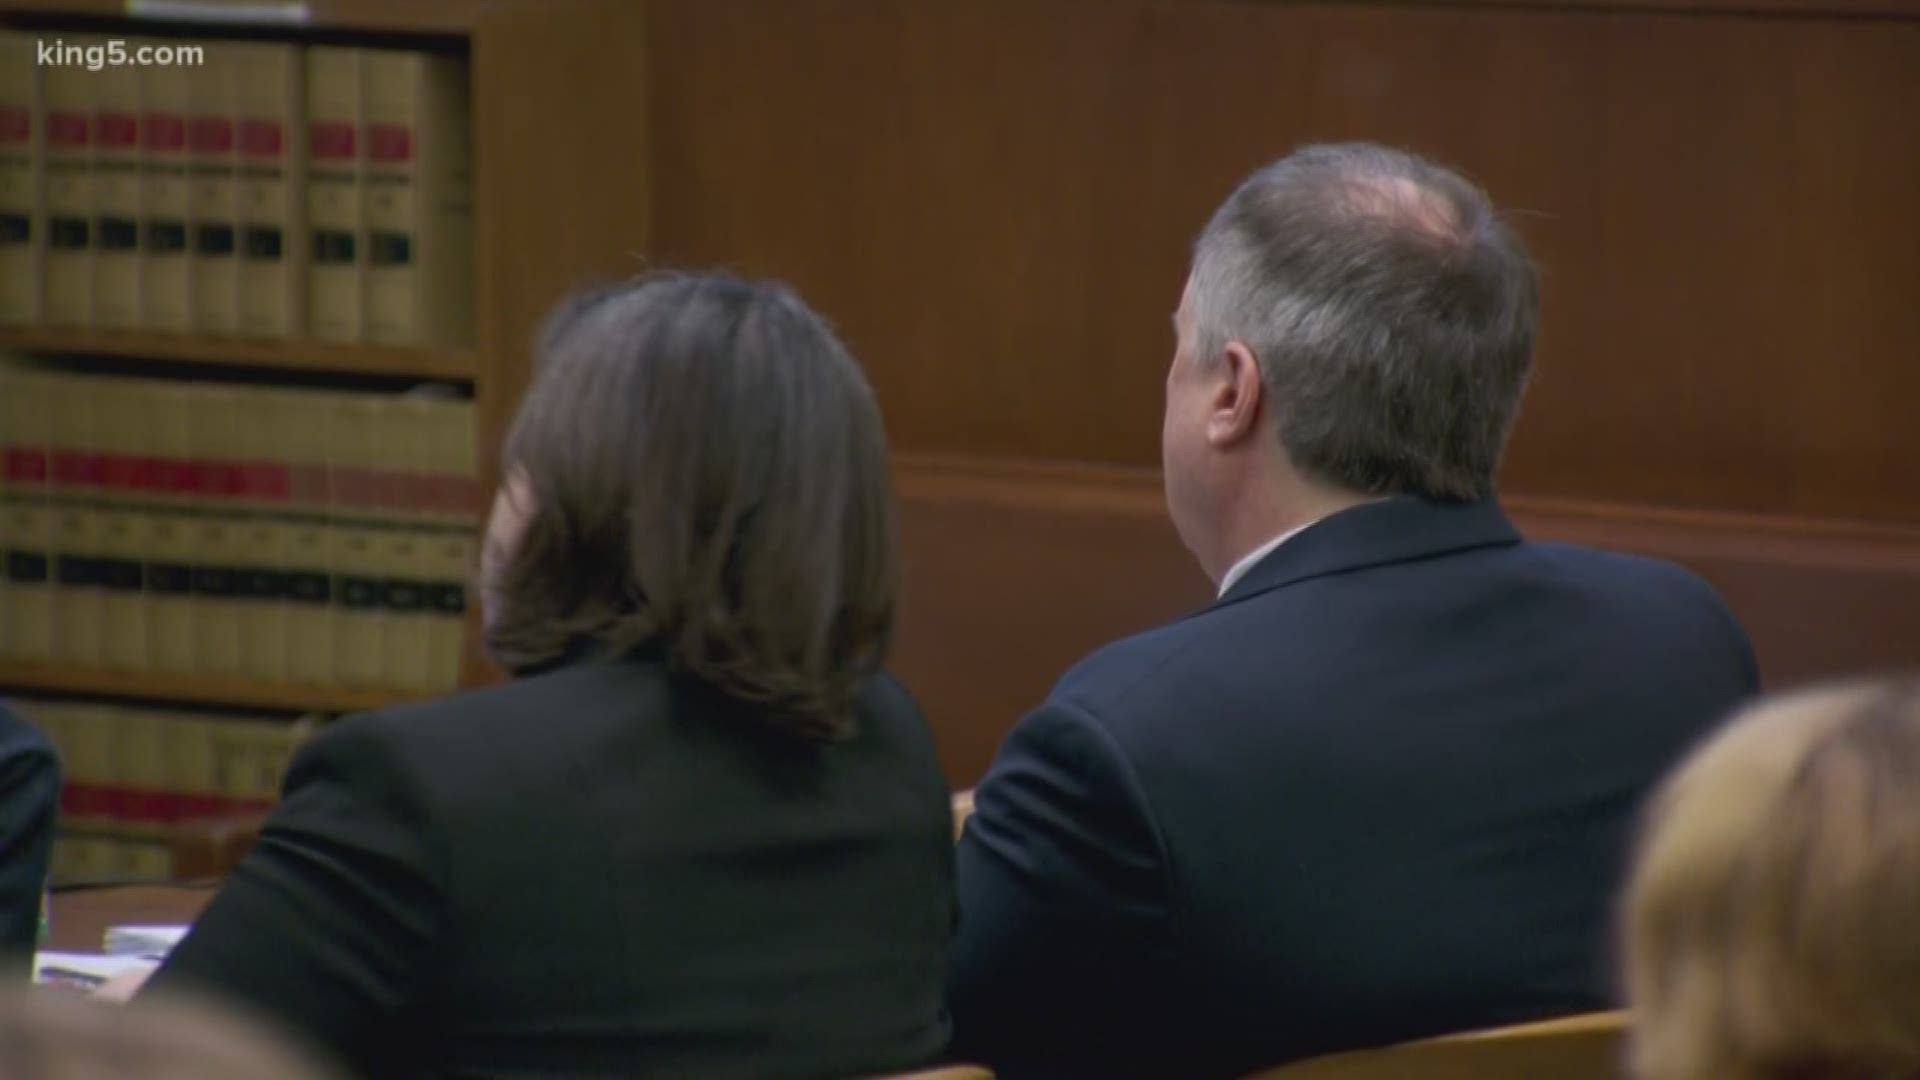 DNA is key evidence in a cold case murder trial now going on in Bellingham. 18-year-old Mandy Stavik was murdered back in 1989. Neighbor Timothy Bass is now standing trial. KING 5's Eric Wilkinson has a look at the latest developments from inside the Whatcom County Courtroom.